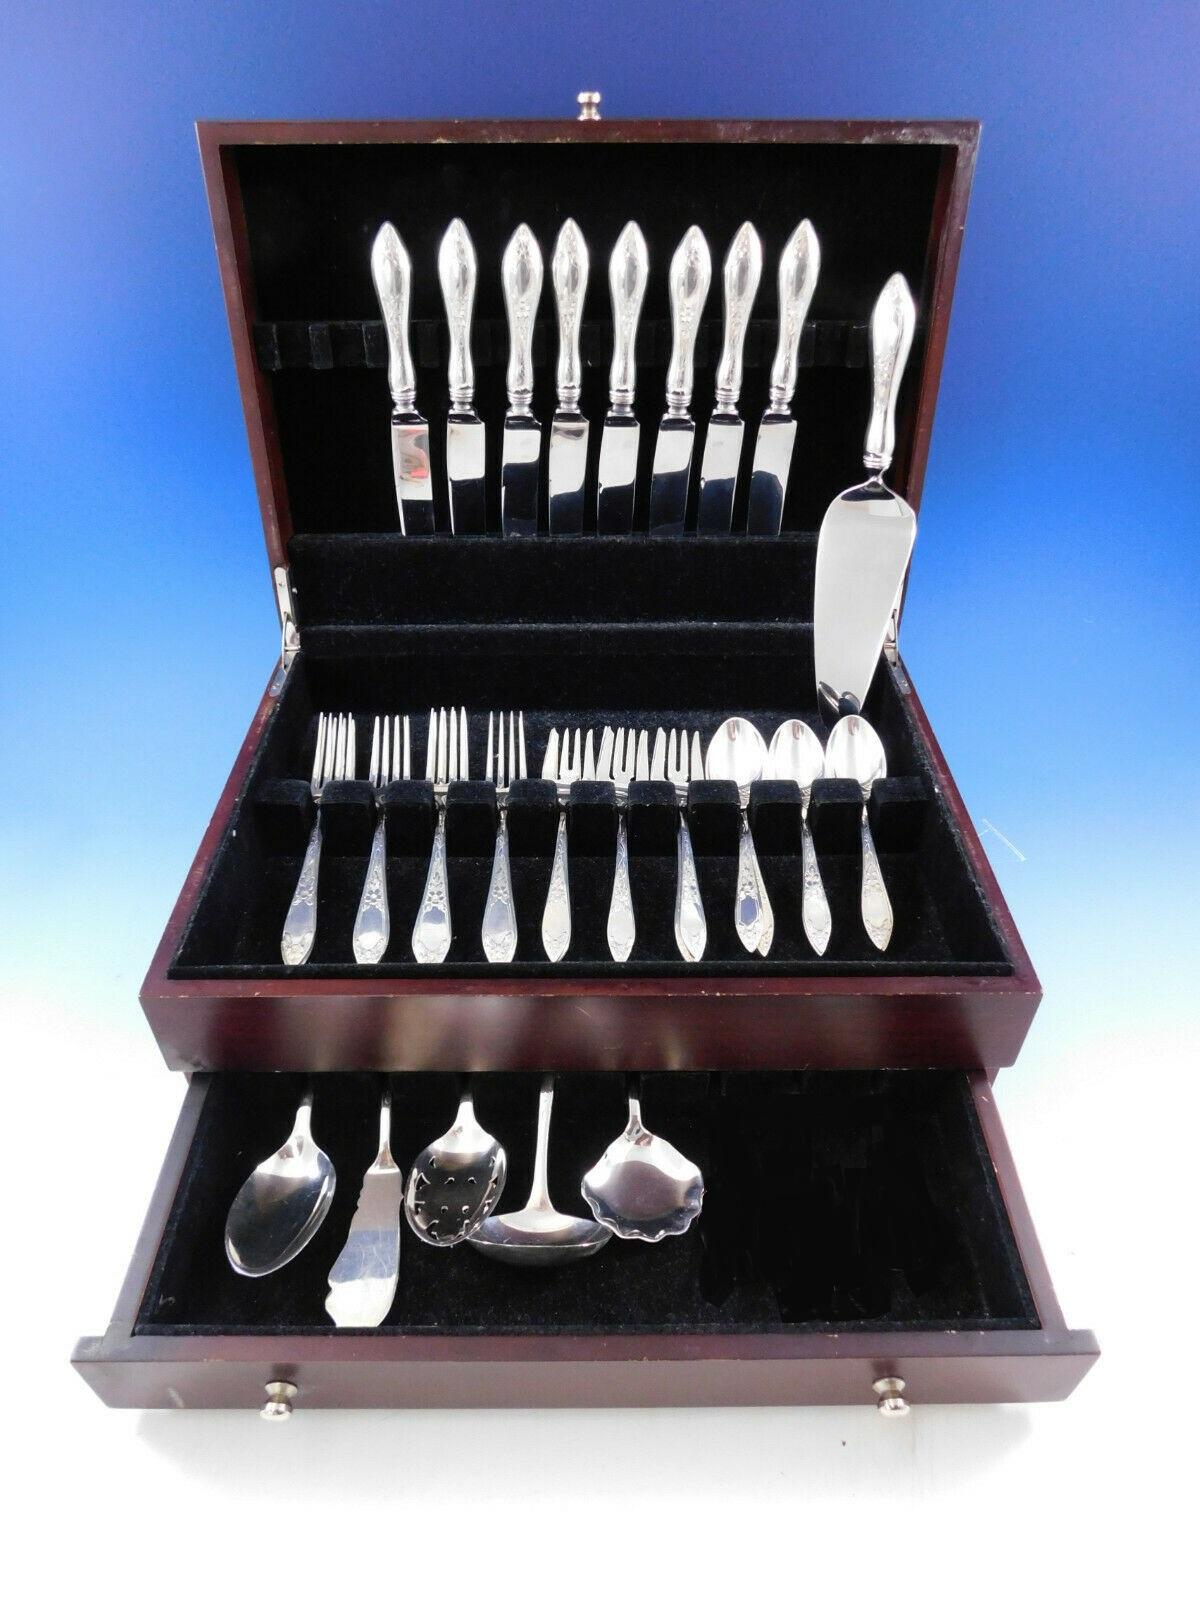 Elegant Lady Claire by Stieff bright-cut Sterling Silver flatware set, 38 pieces. This set includes:

8 knives with stainless french blades, 8 3/4